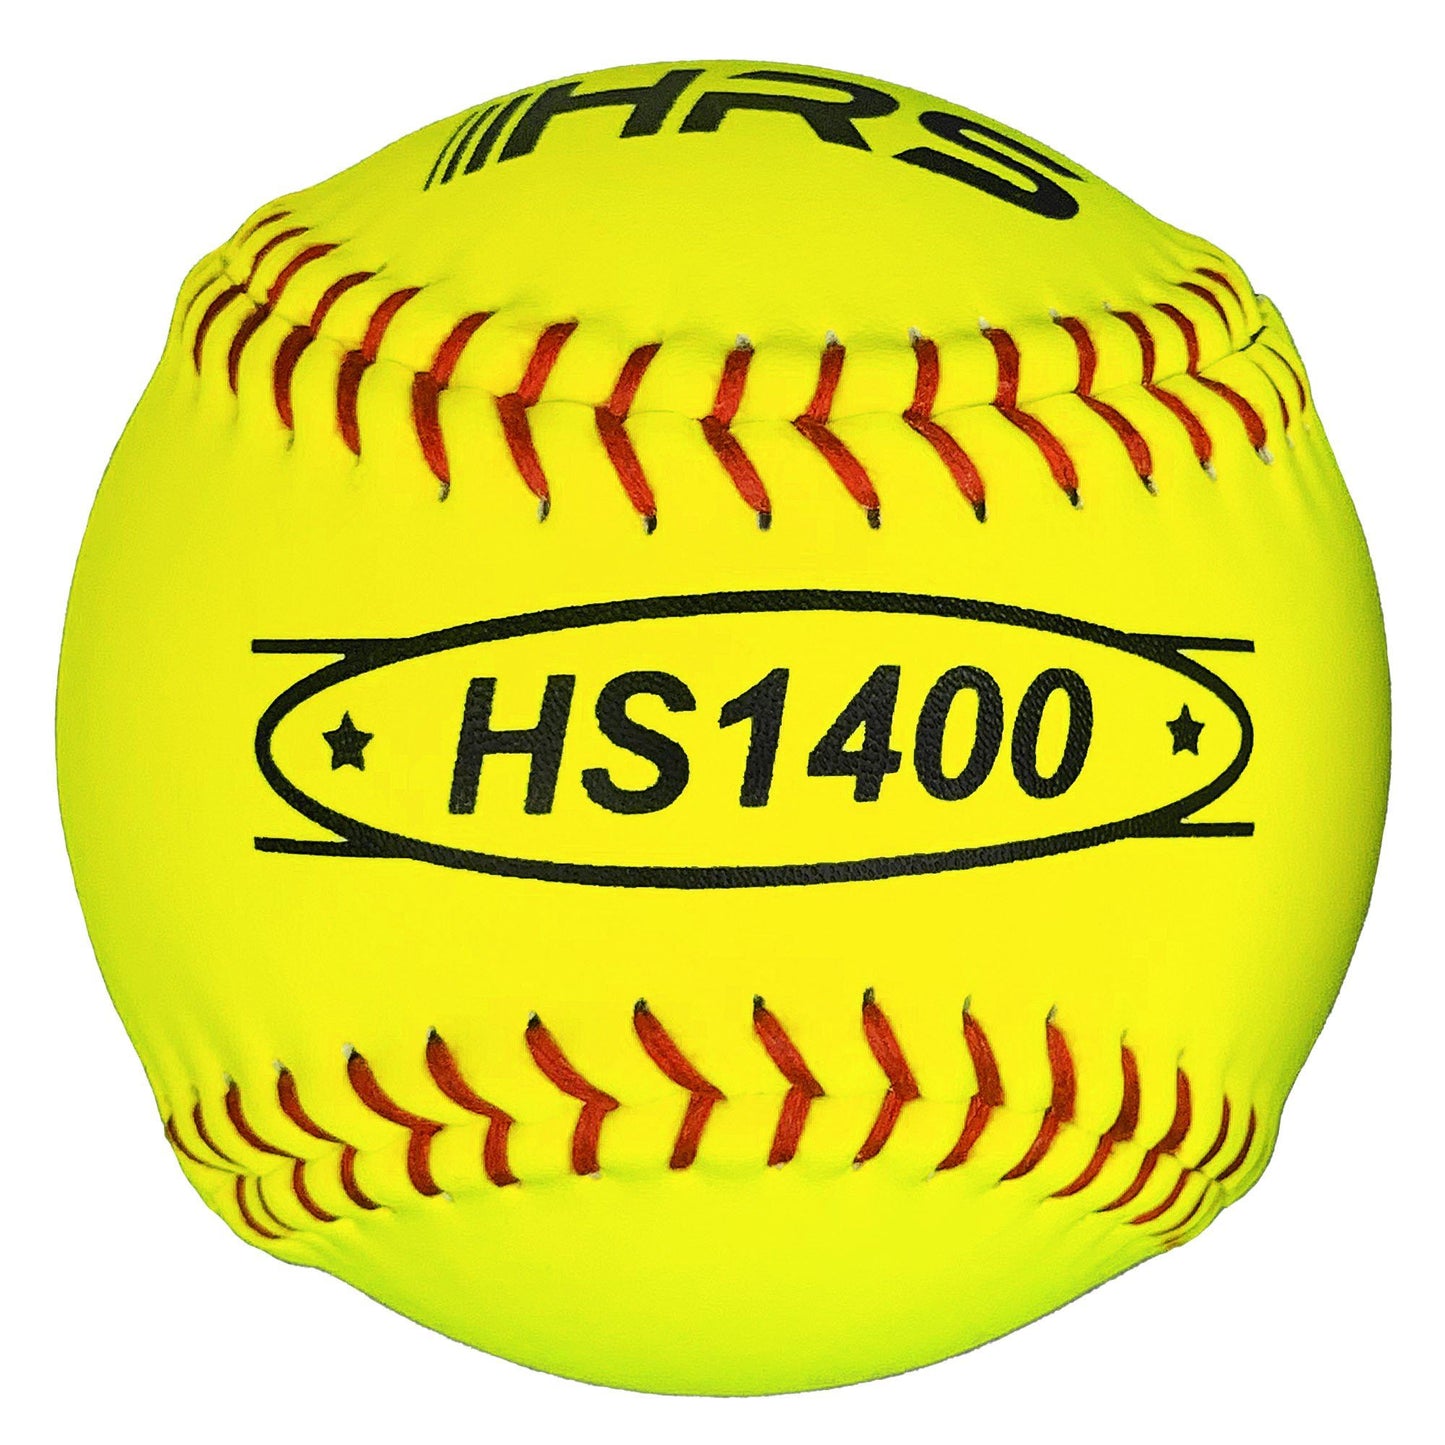 Bucket Of Game Softballs - Official 12 inch size and weight